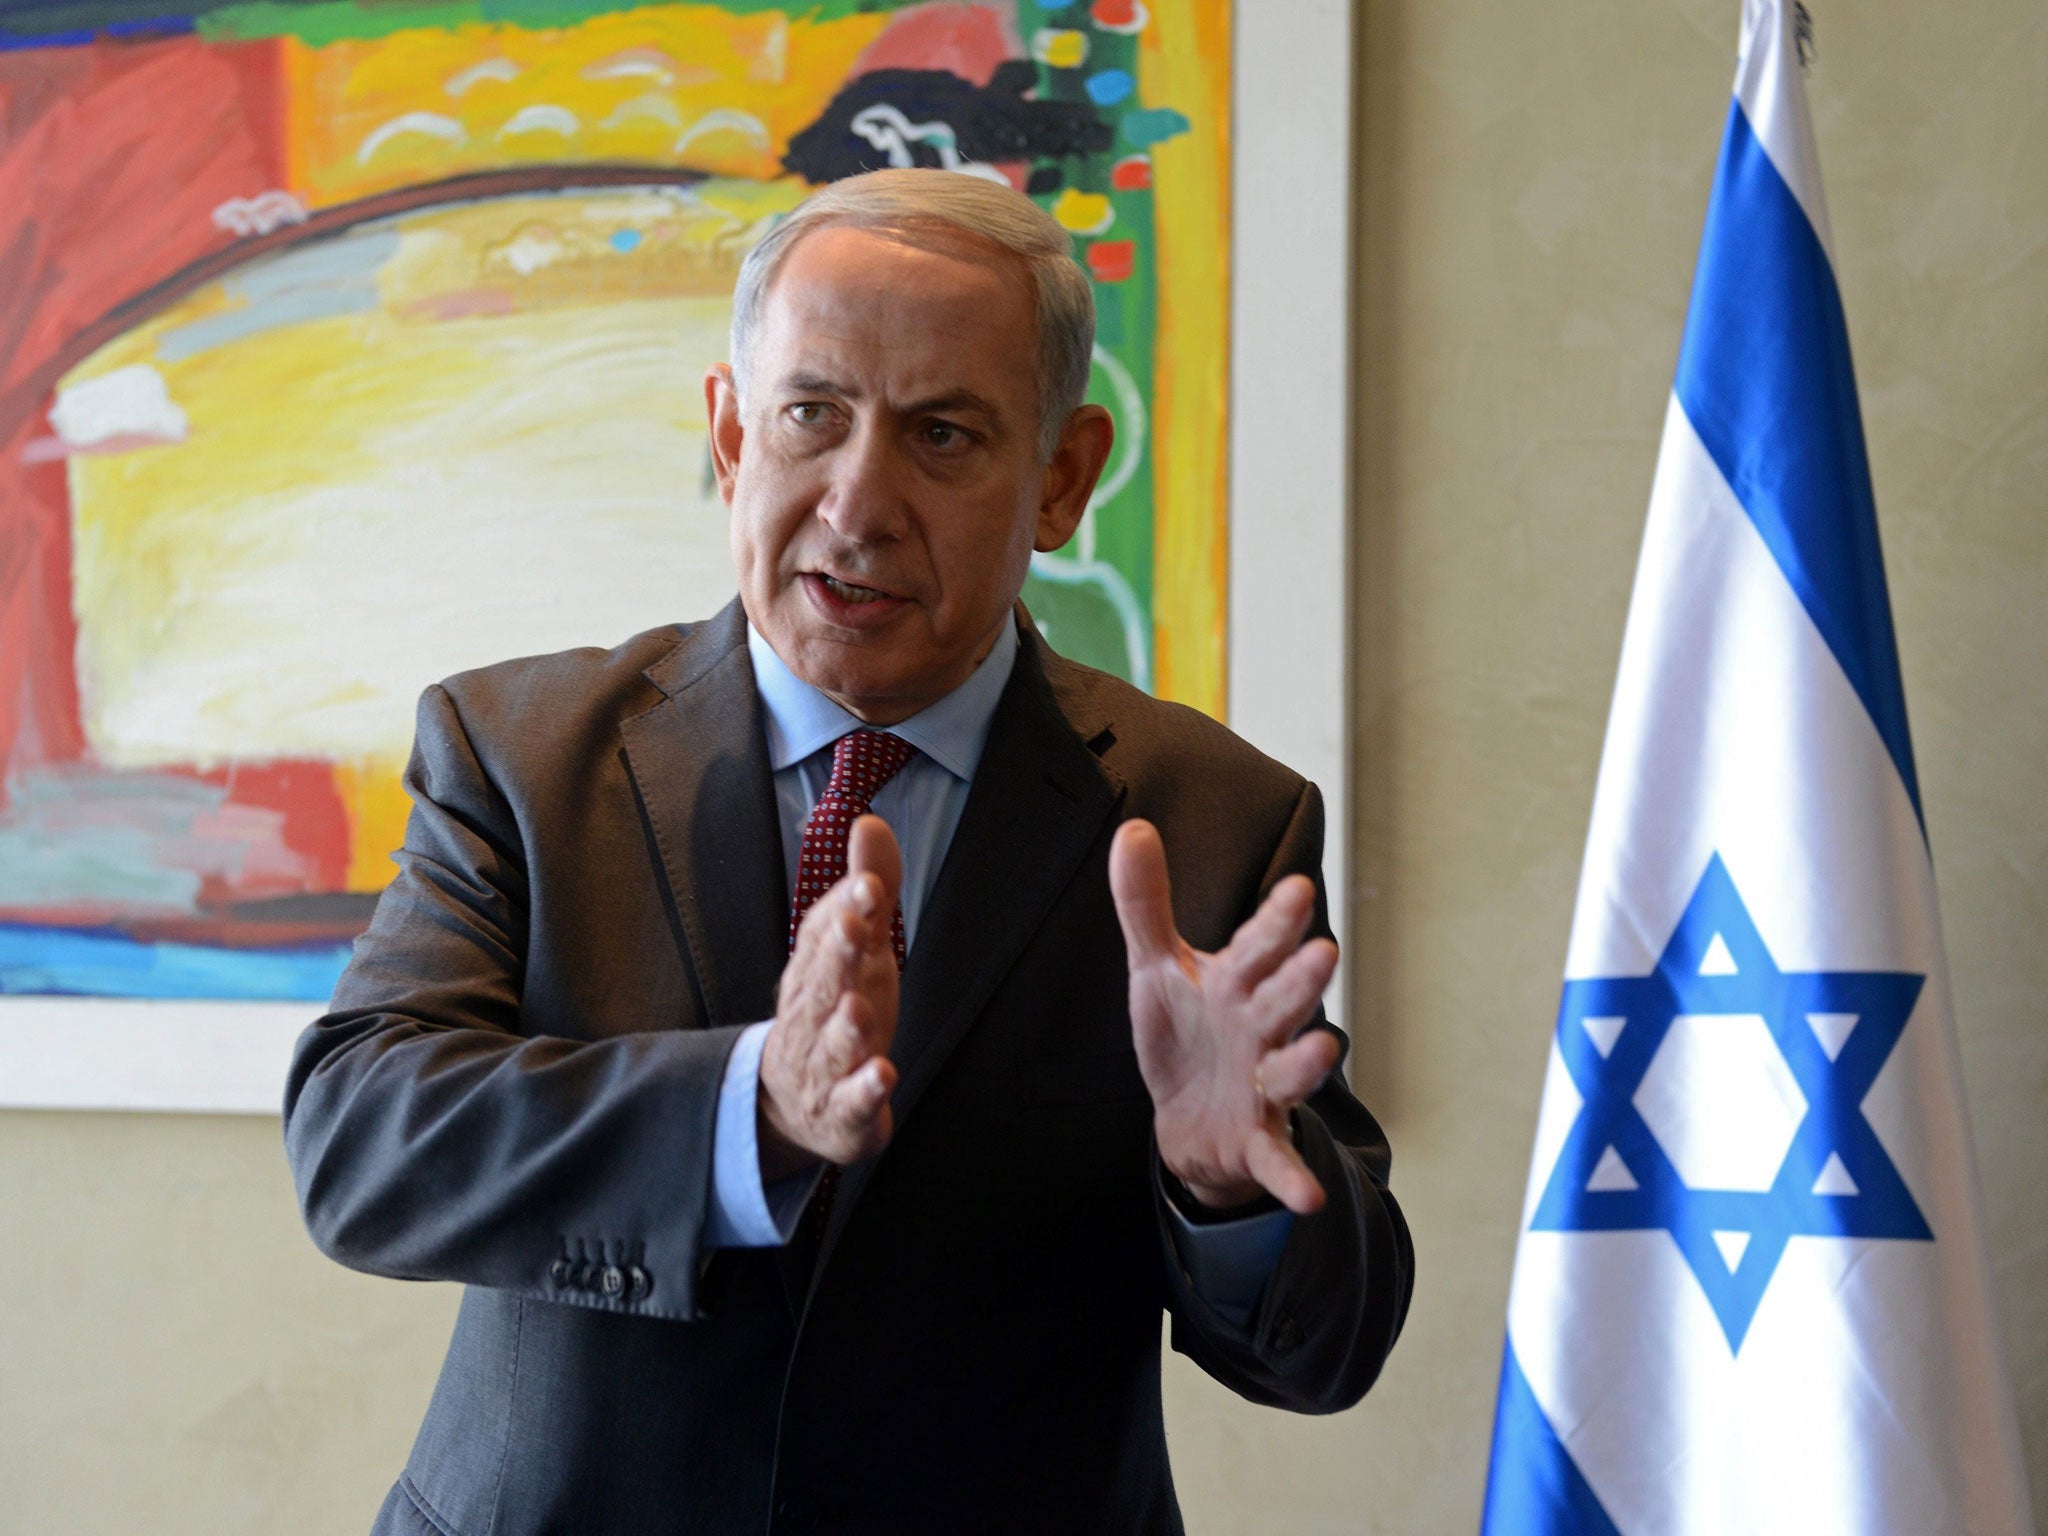 Israeli Prime Minister Benjamin Netanyahu says country may use military force to stop Iran from attaining nuclear weaponry